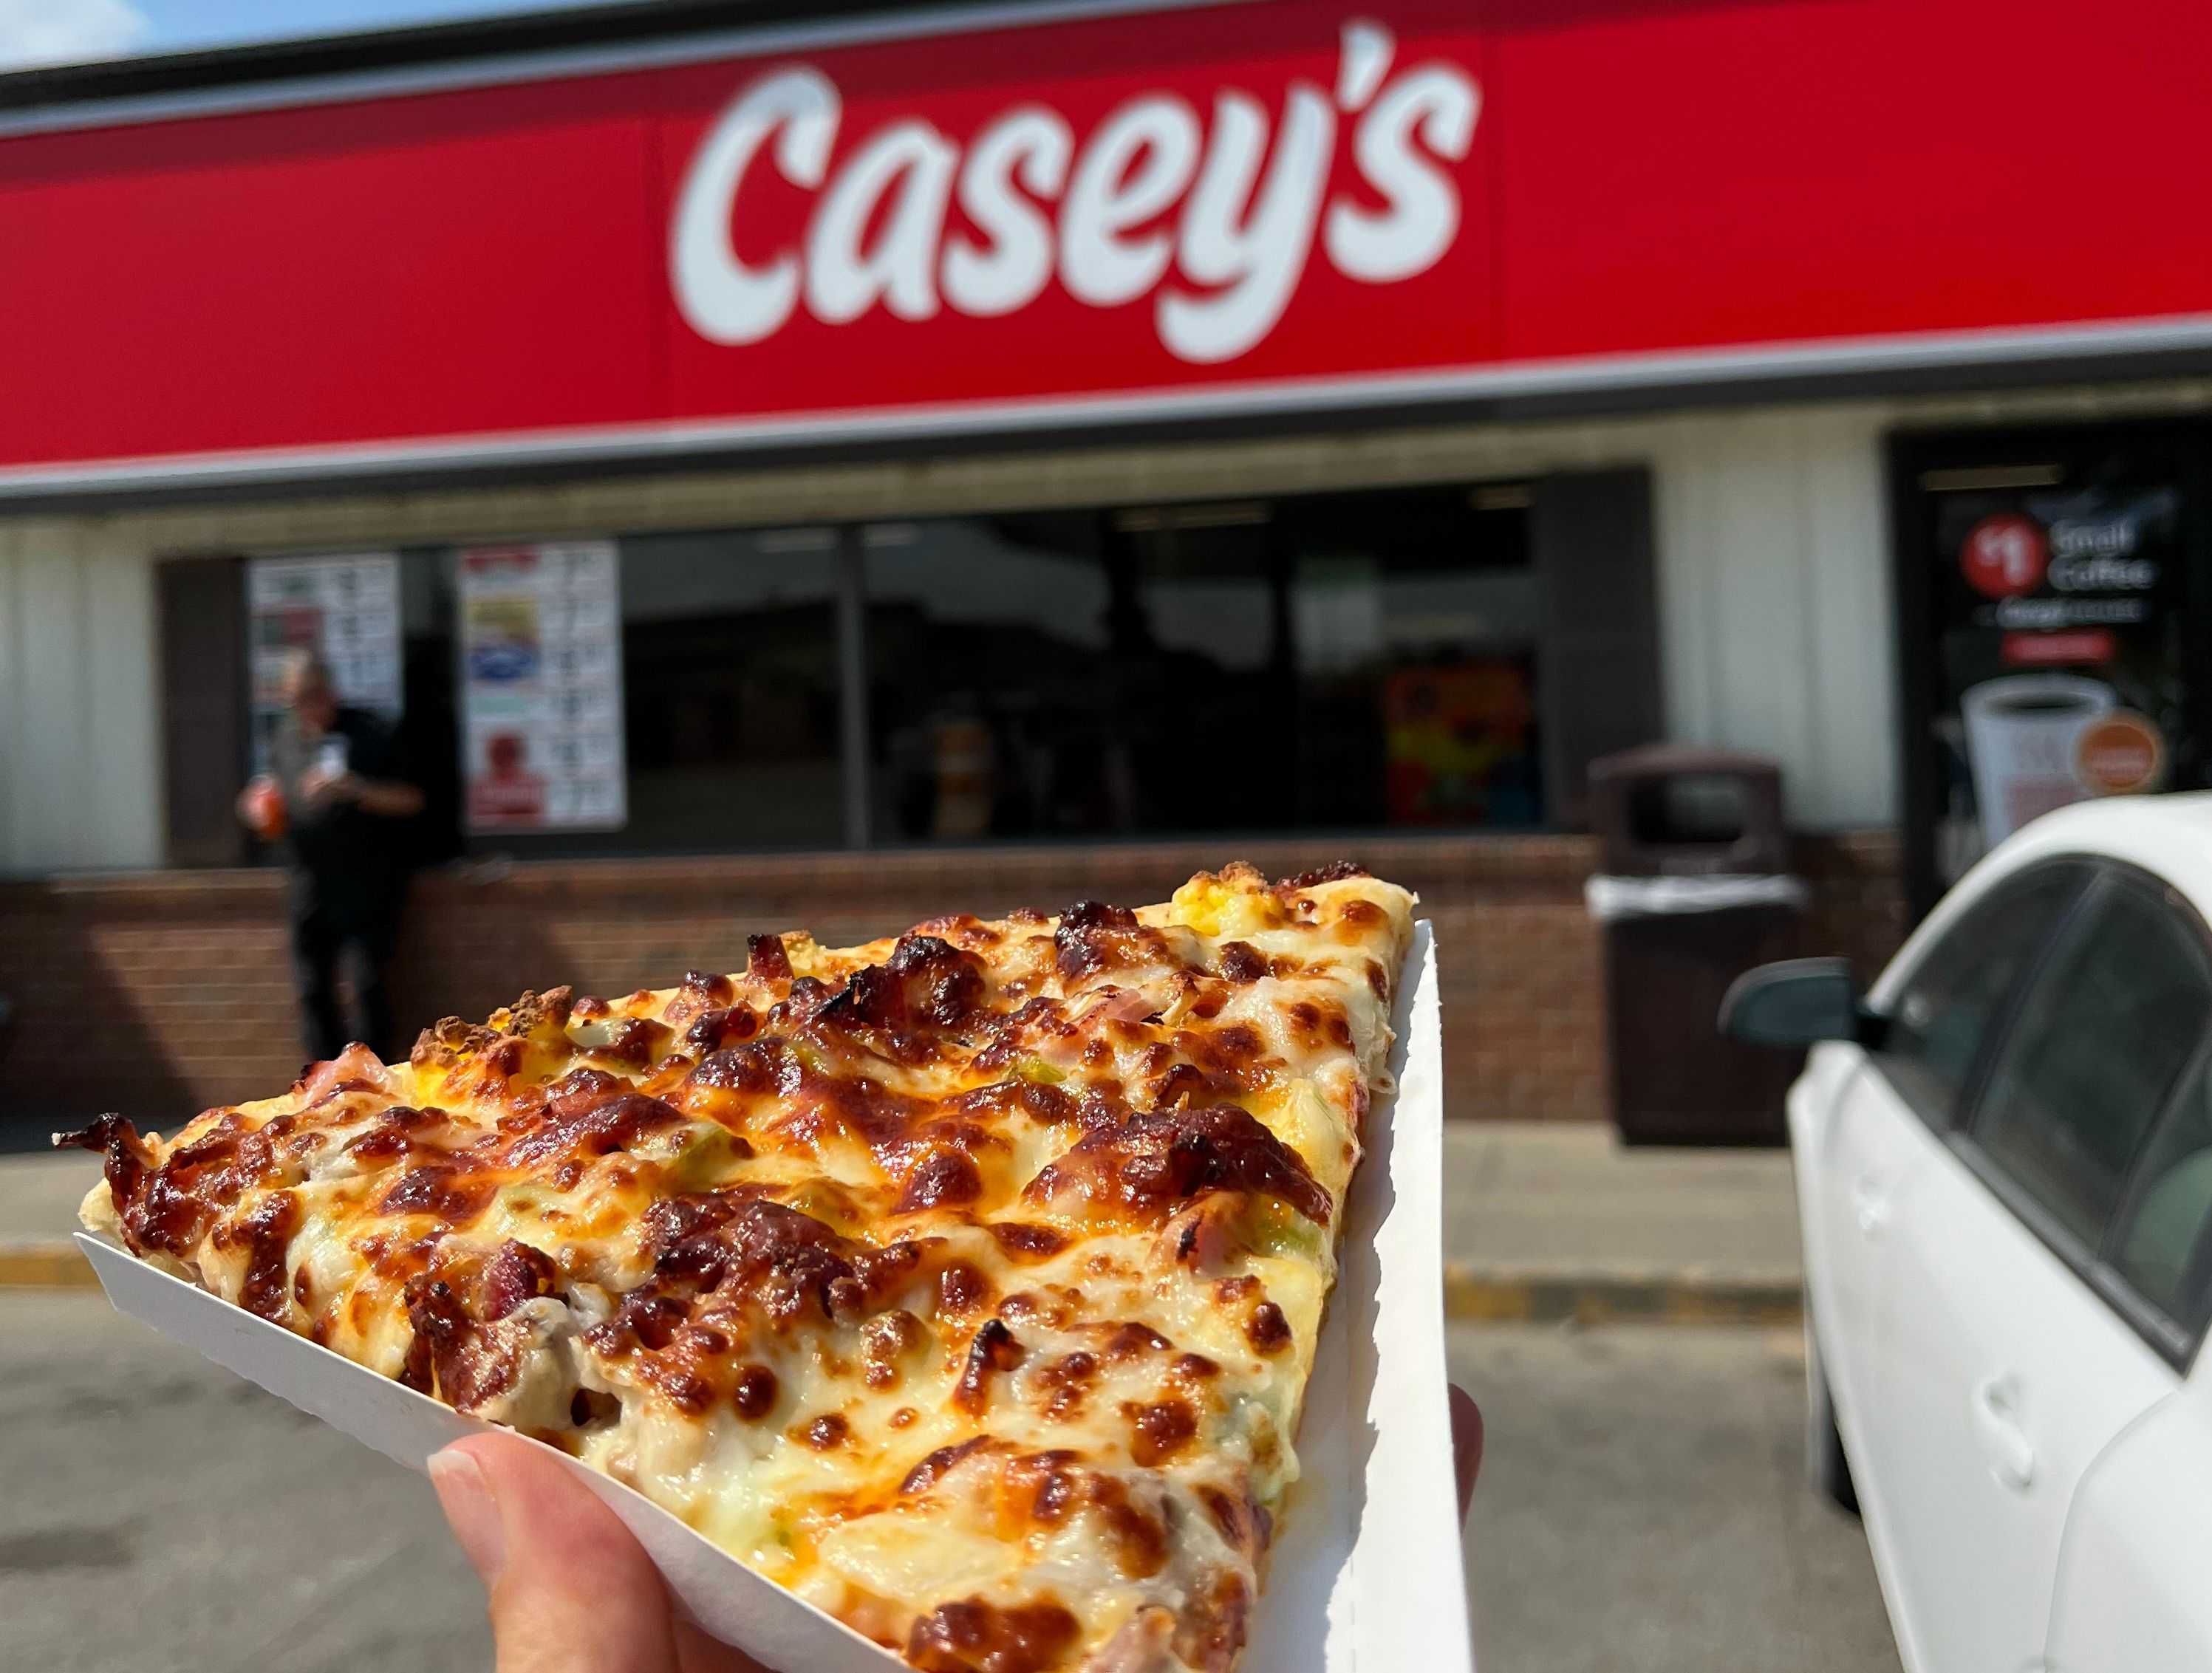 A slice of Casey's breakfast pizza purchased at the convenience store chain's location in Osceola, Iowa.